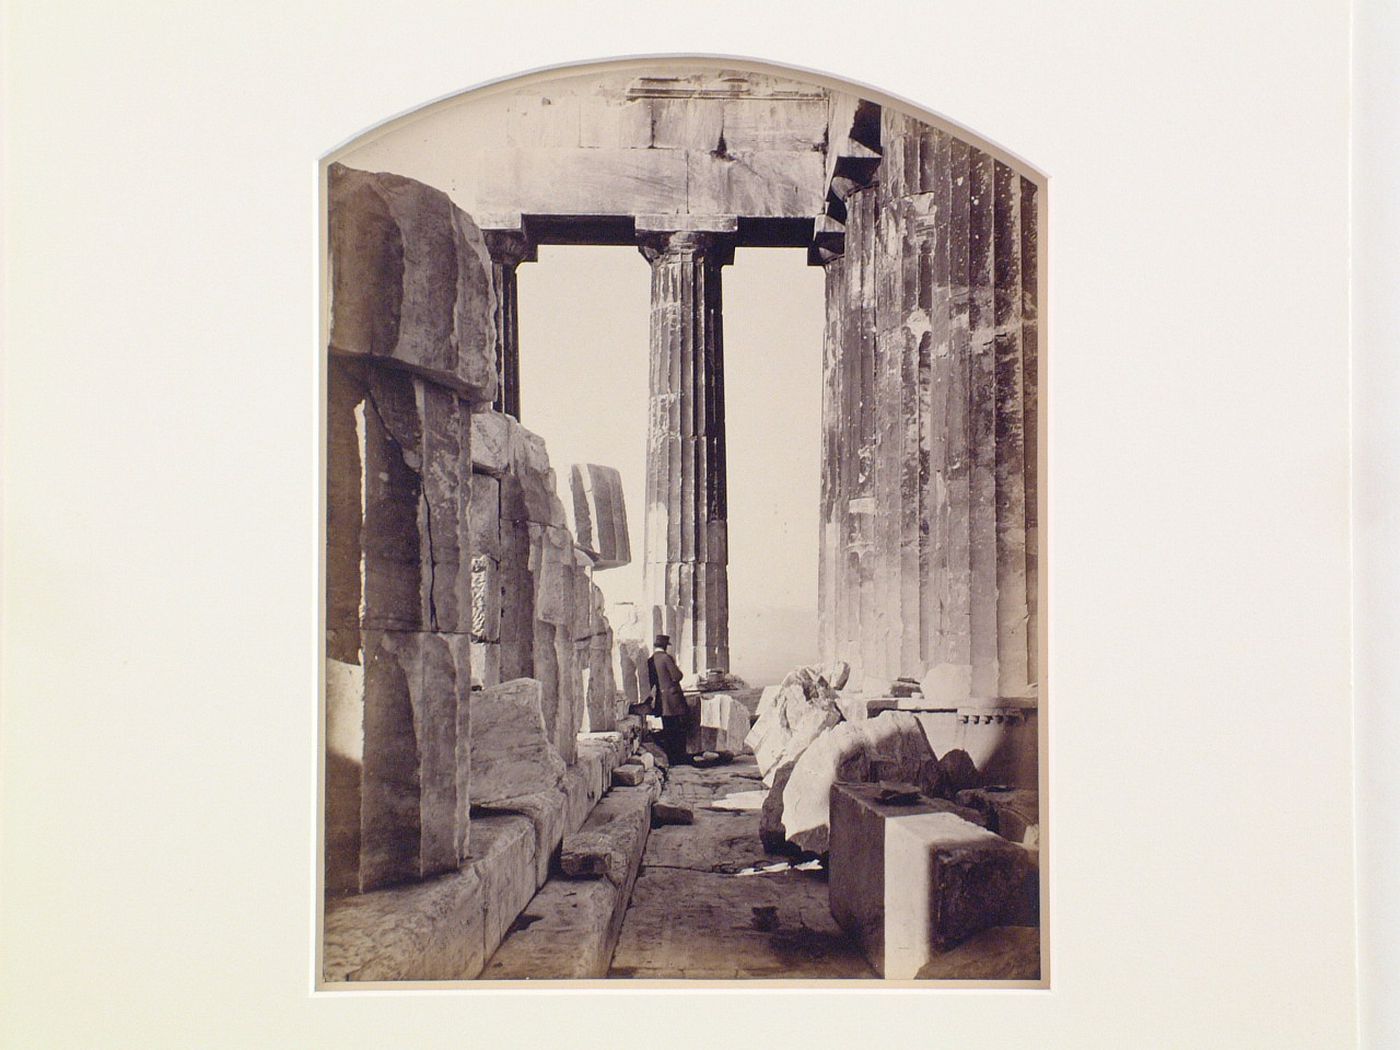 View of East porch of the Parthenon, with person in top hat, possibly William Stillman, standing at the far end, Acropolis, Athens, Greece